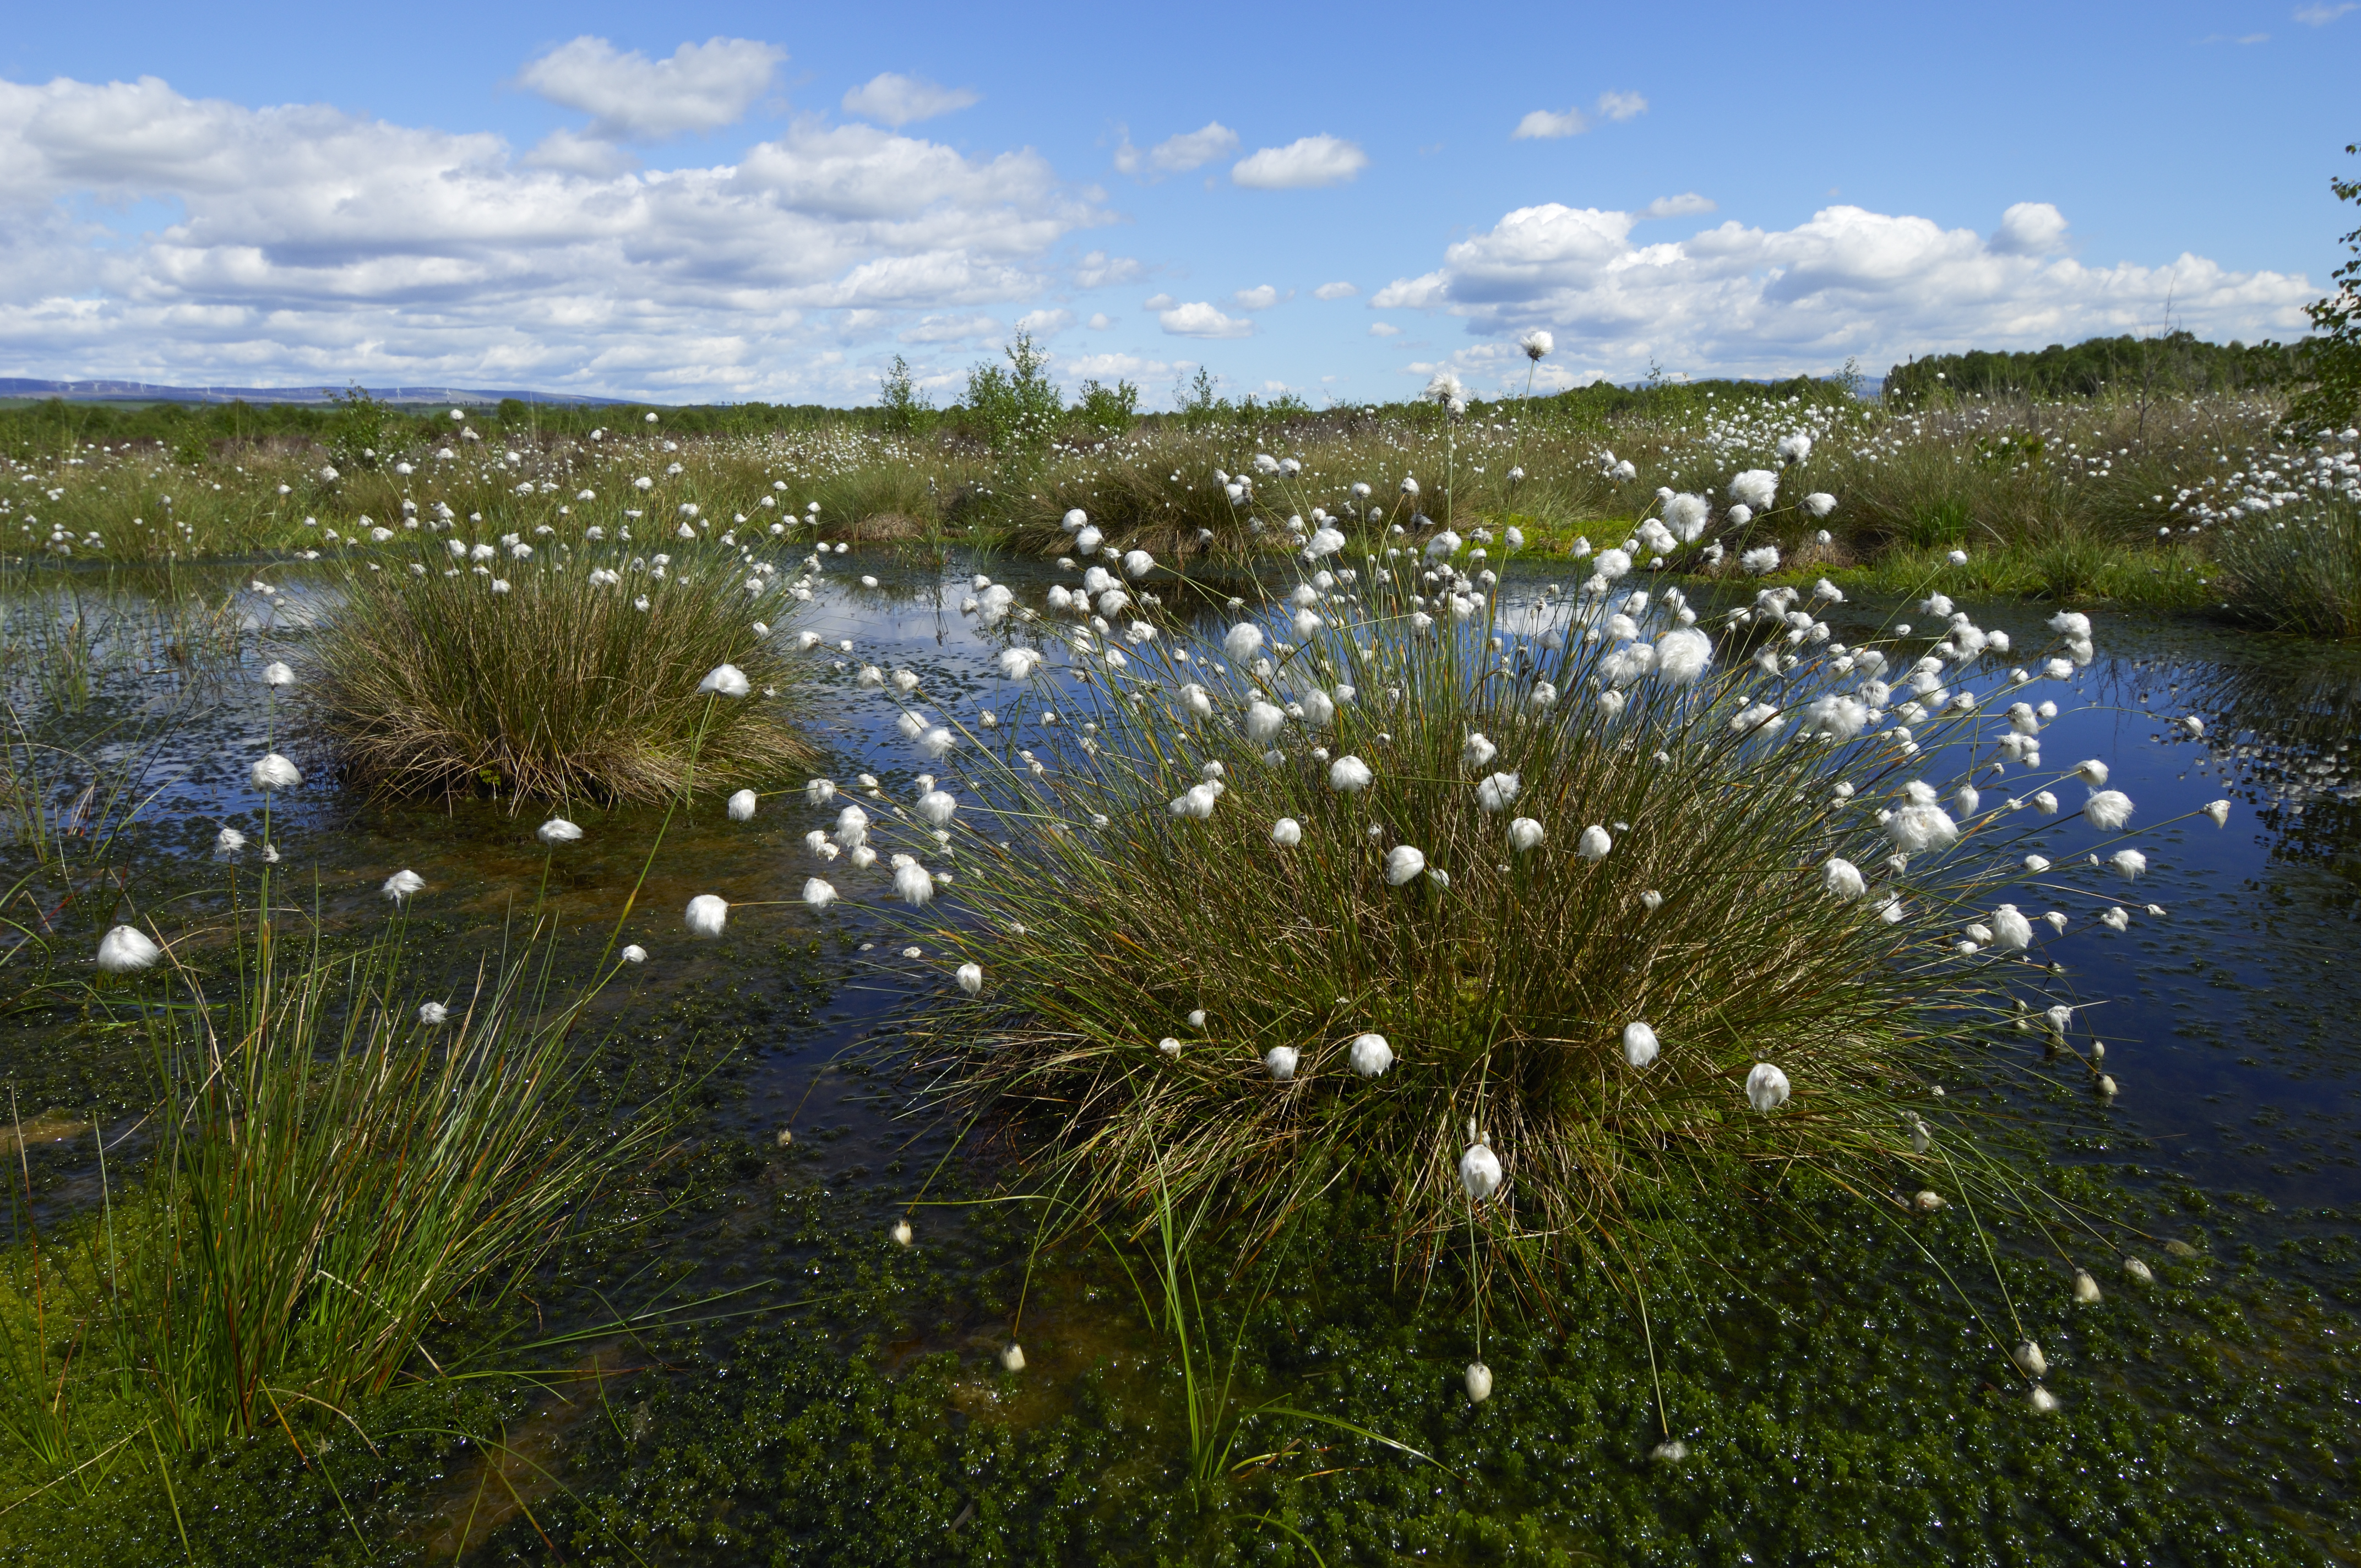 Cotton grass growing in bog pools. ©David Pickett/SNH. For information on reproduction rights contact the Scottish Natural Heritage Image Library on Tel. 01738 444177 or www.nature.scot 